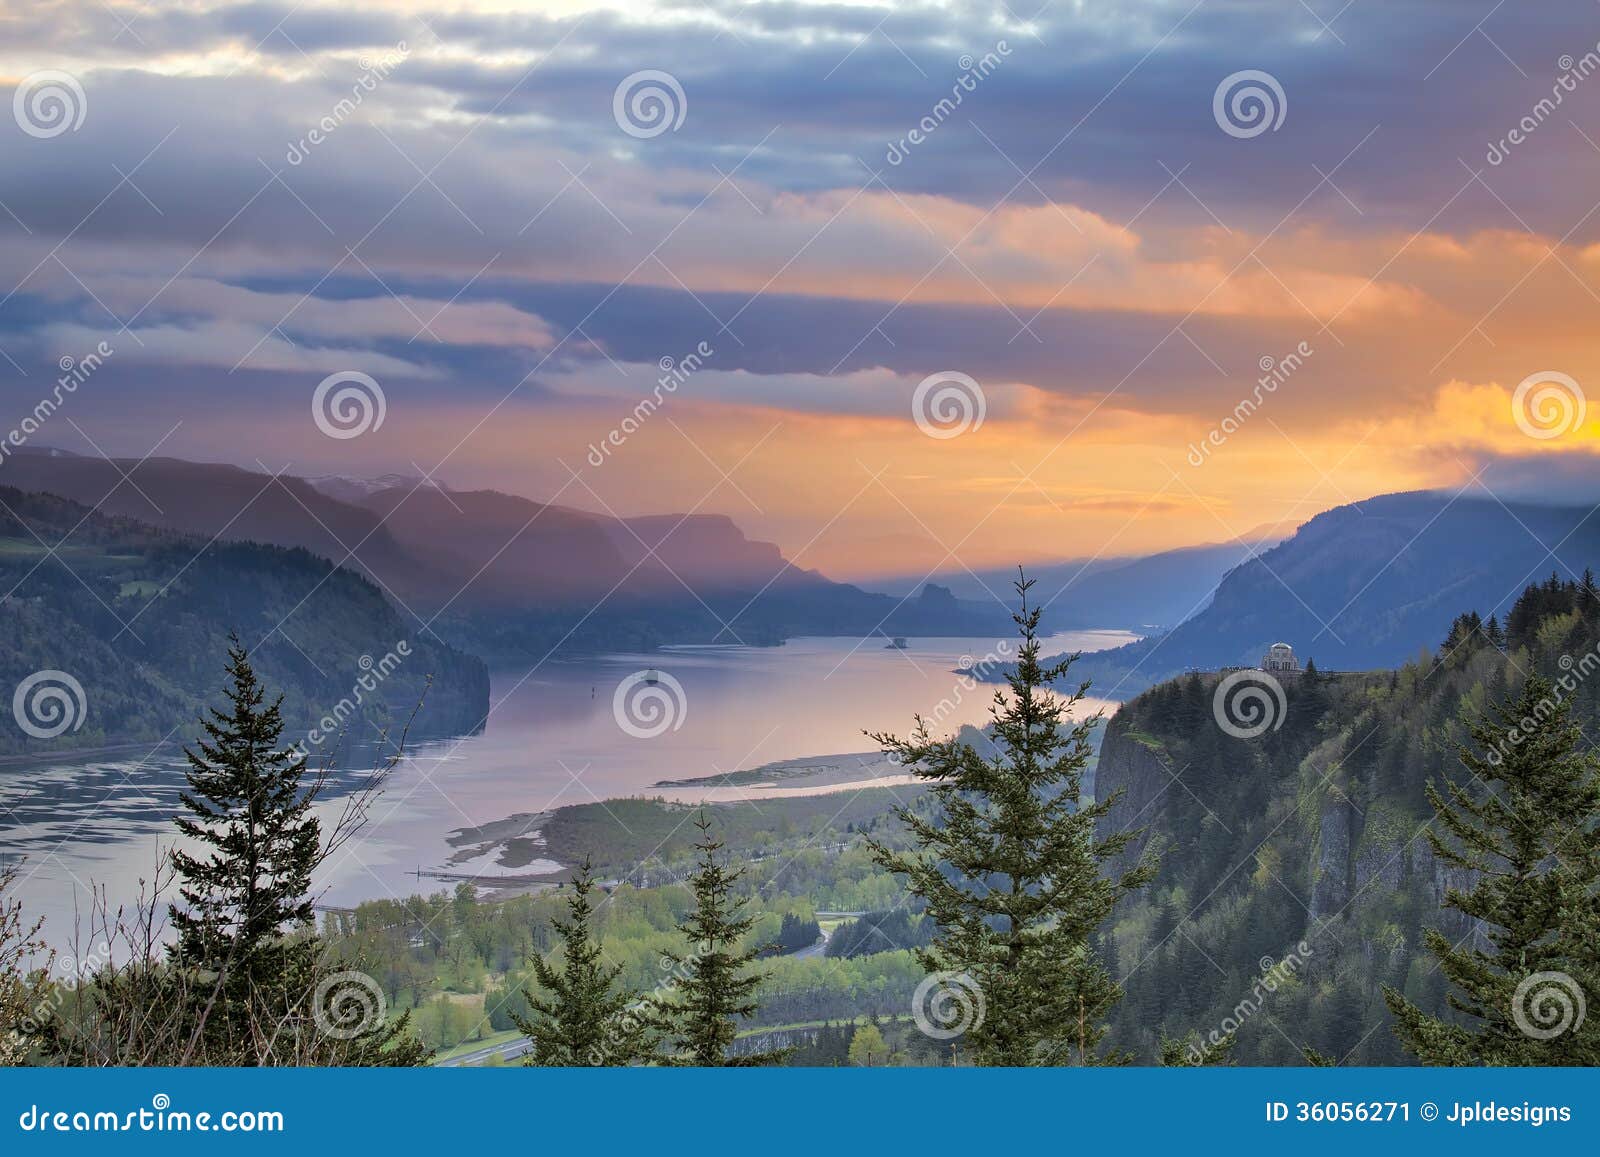 sunrise over crown point at columbia river gorge